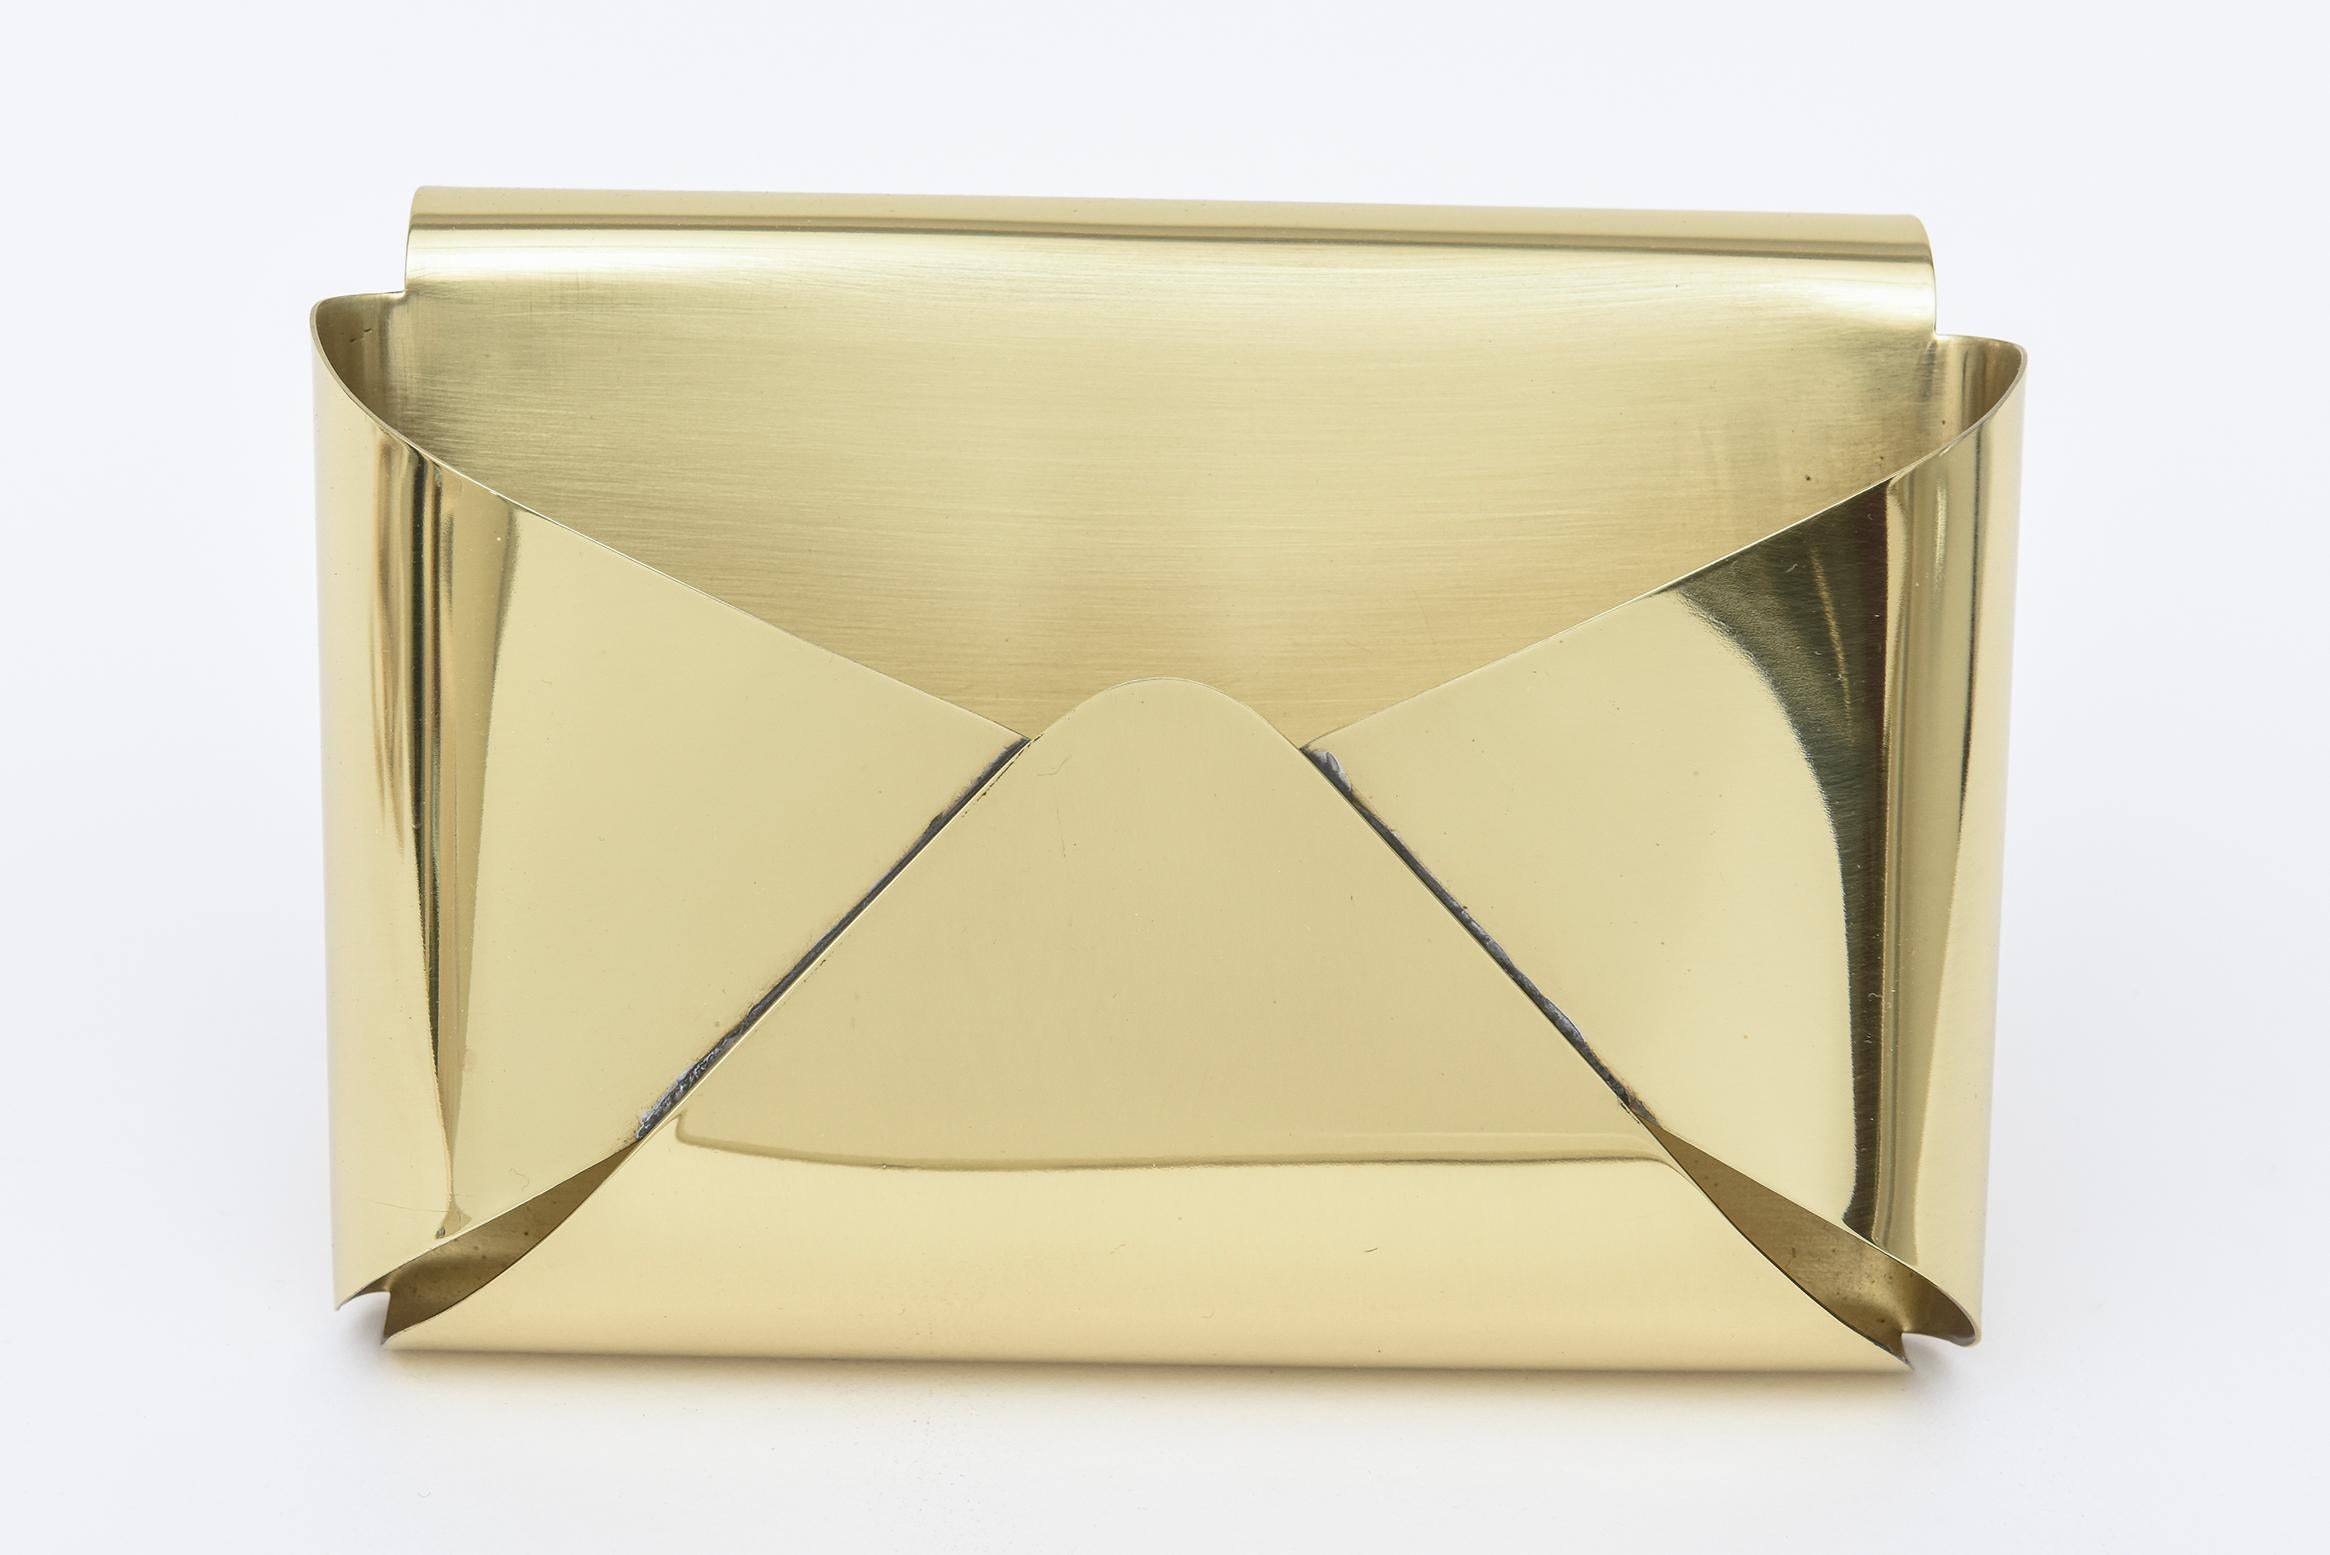 This ever so chic and obscure vintage Italian brass box is simply a pop art design of a form of an opened up envelope that is a box. it is from the late 60's or early 70's. It has been meticulously polished and then lacquered so it will not patina.